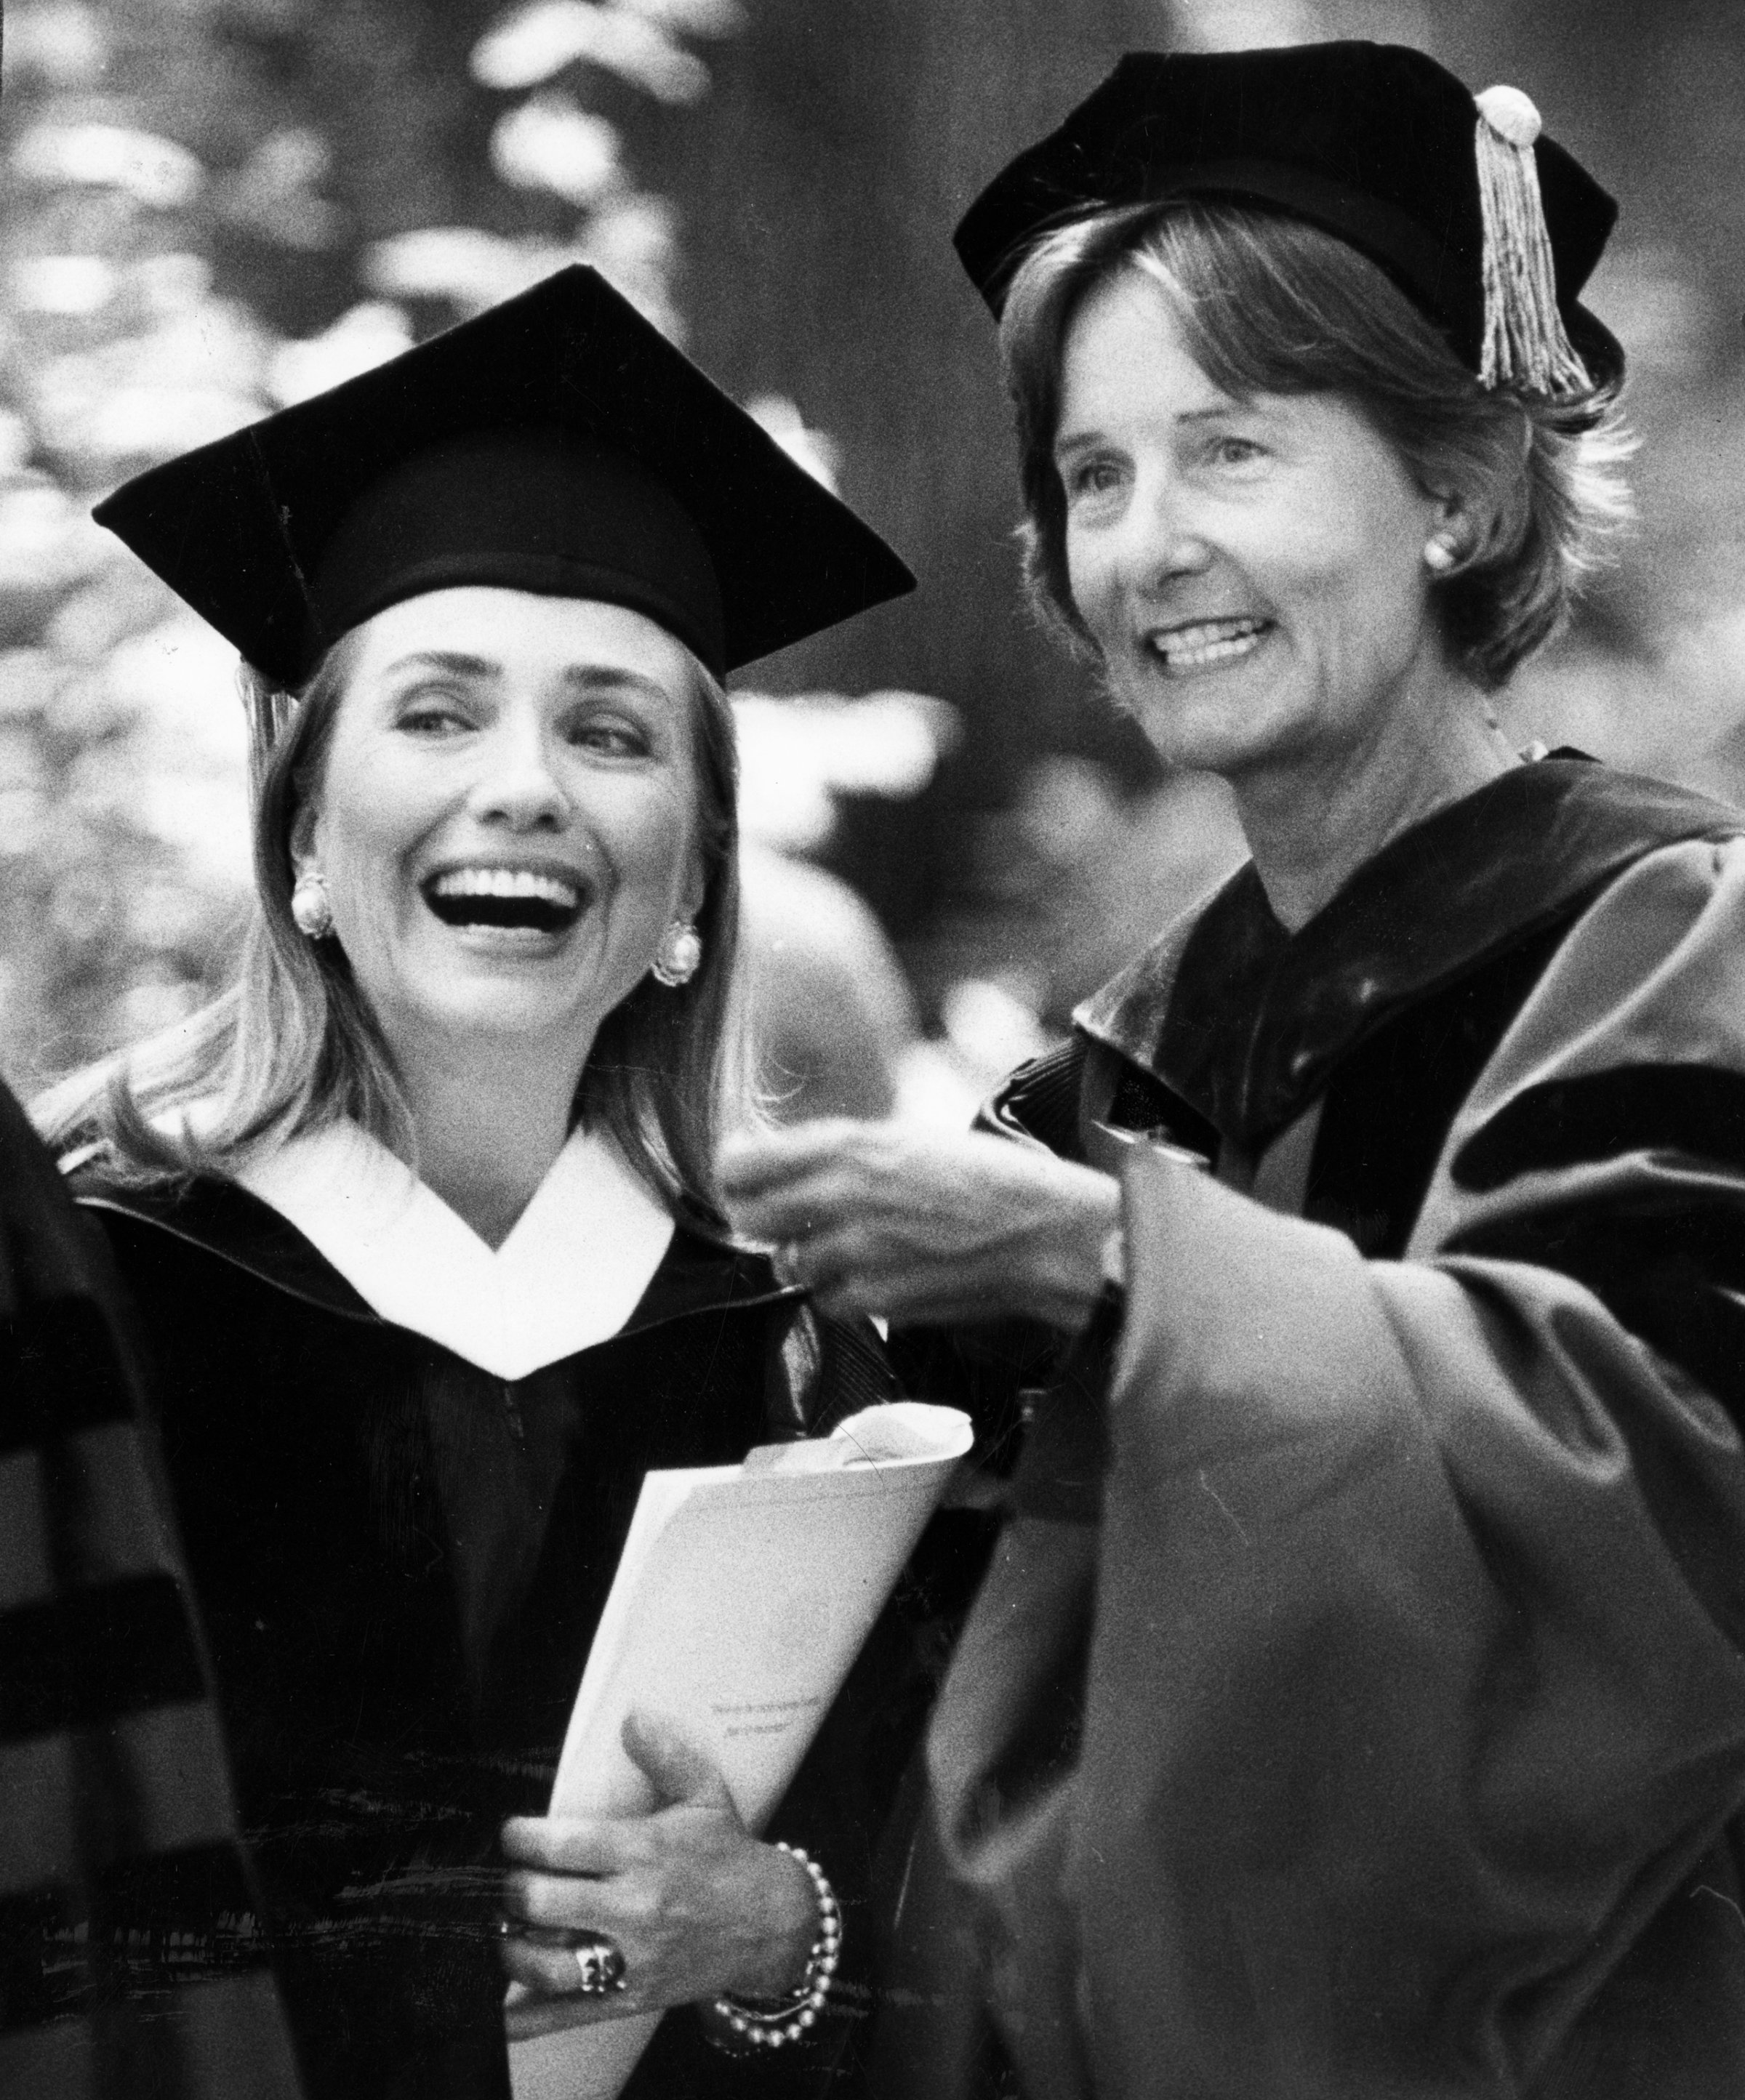 Hillary Clinton, right, and Wellesley College's president, Nannerl O. Keohane, share a light moment at commencement in Wellesley, Mass., on May 29, 1992.